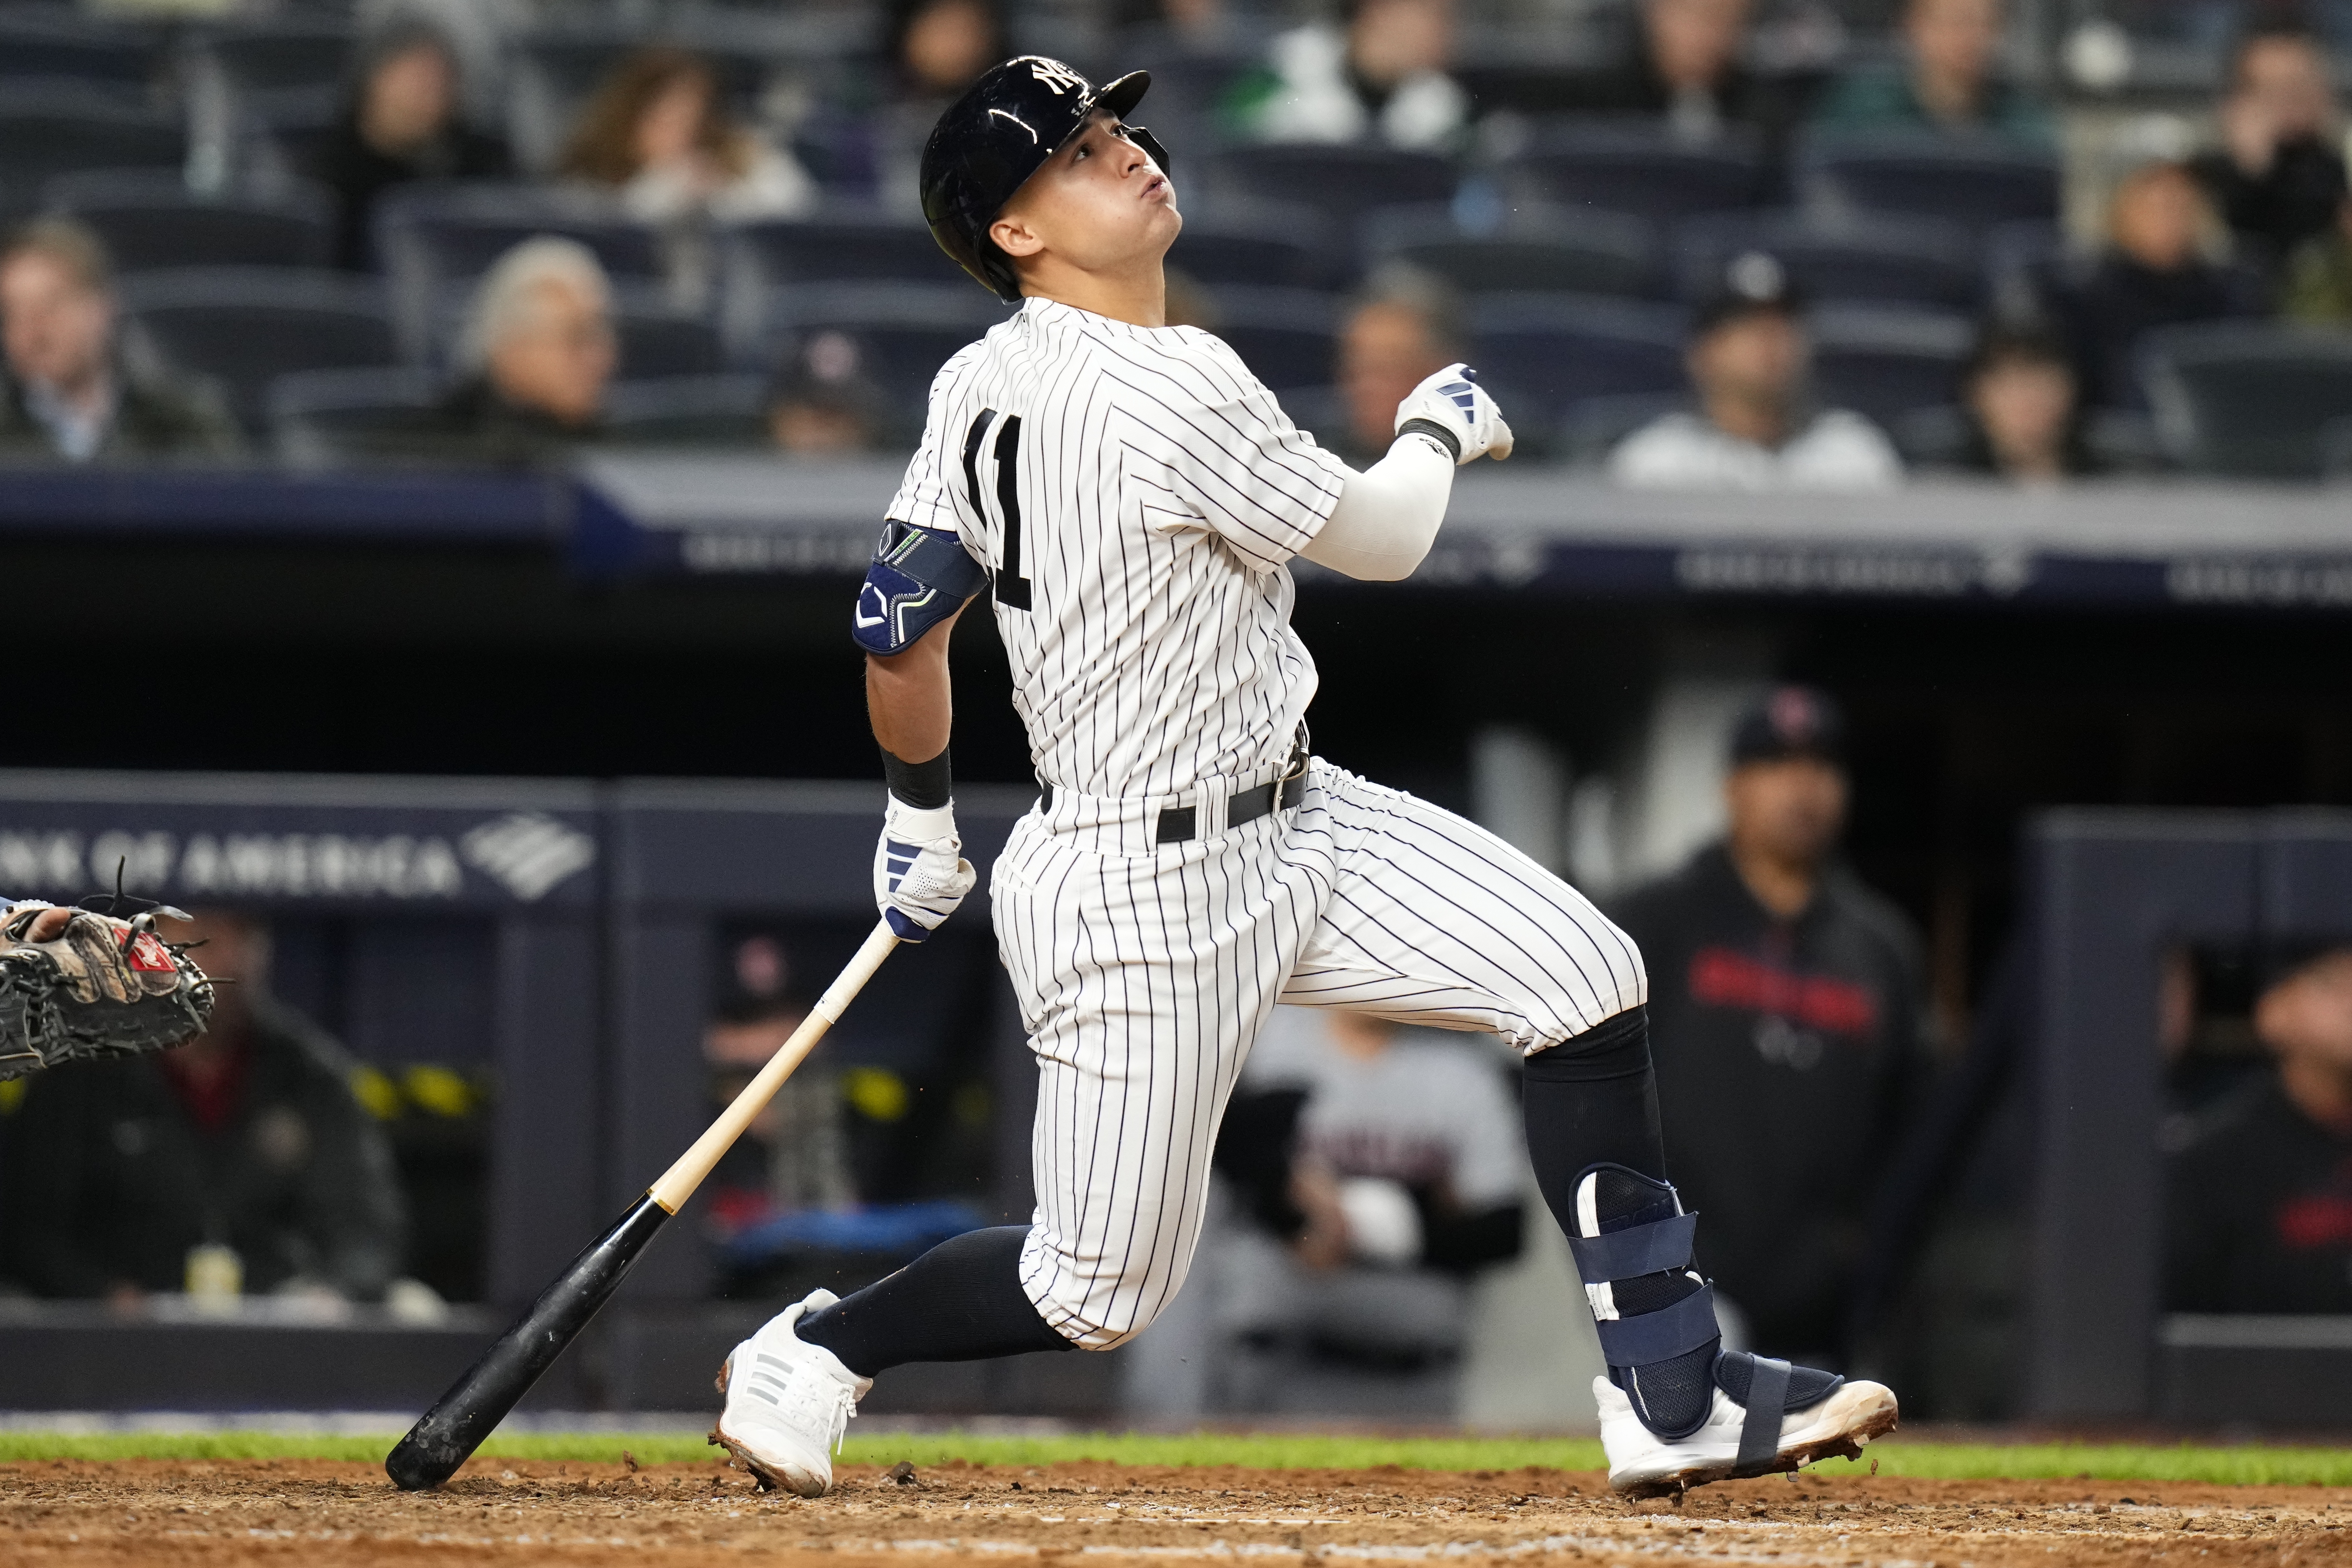 Anthony Volpe feels at home with Yankees in MLB debut